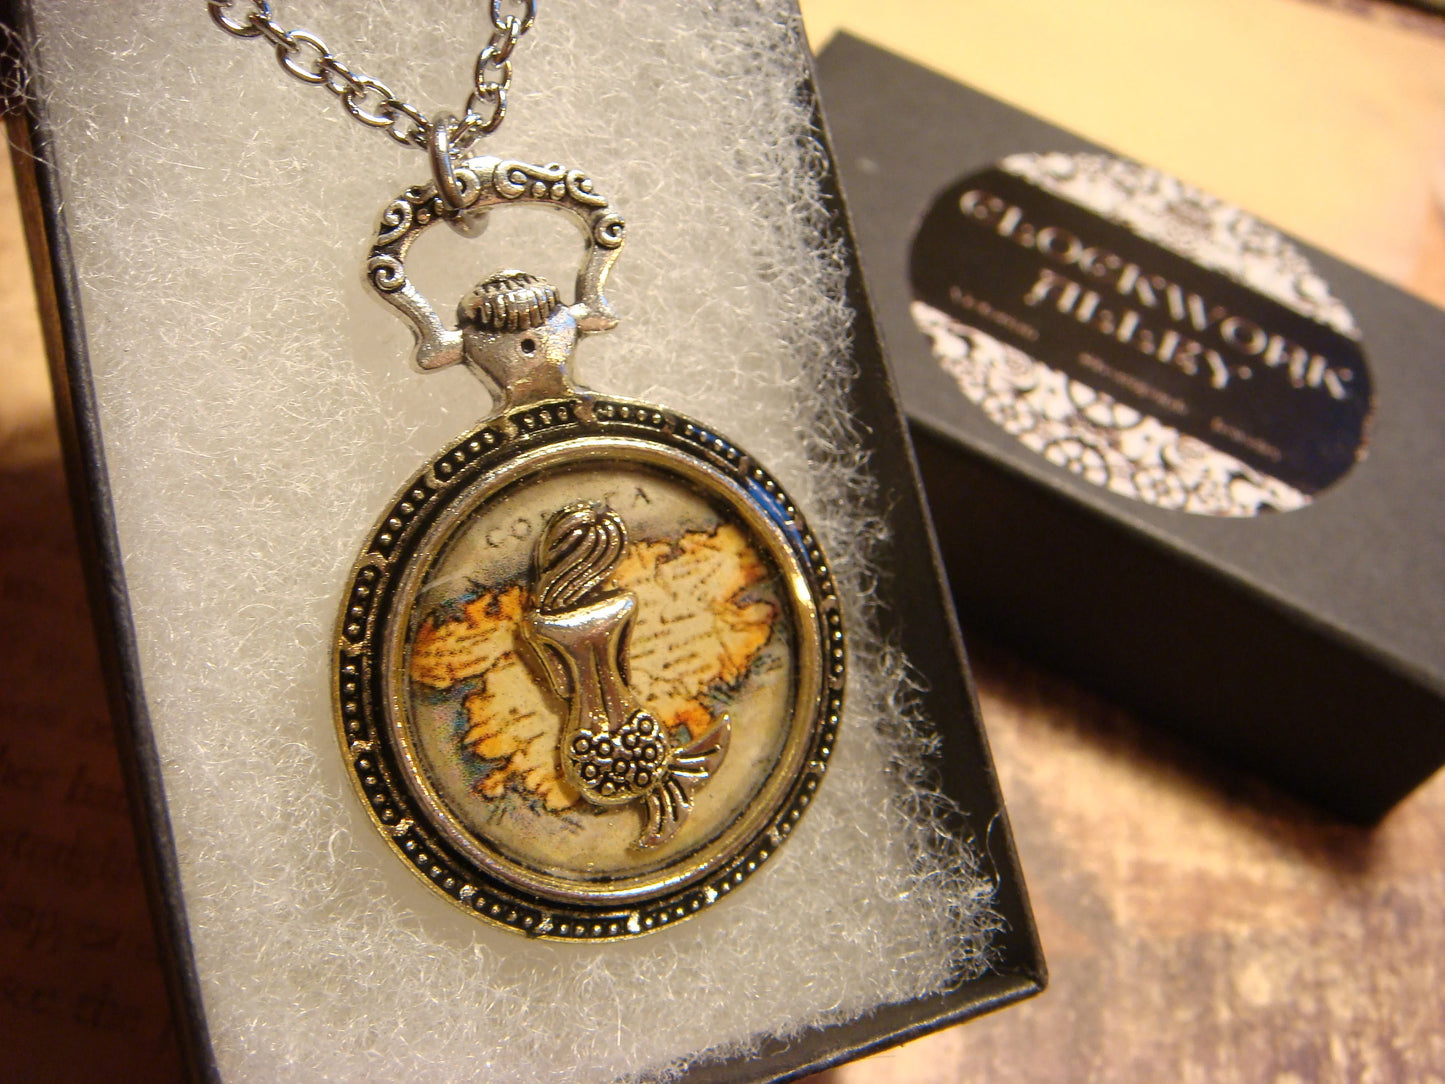 Mermaid over Map Pocket Watch Pendant Necklace